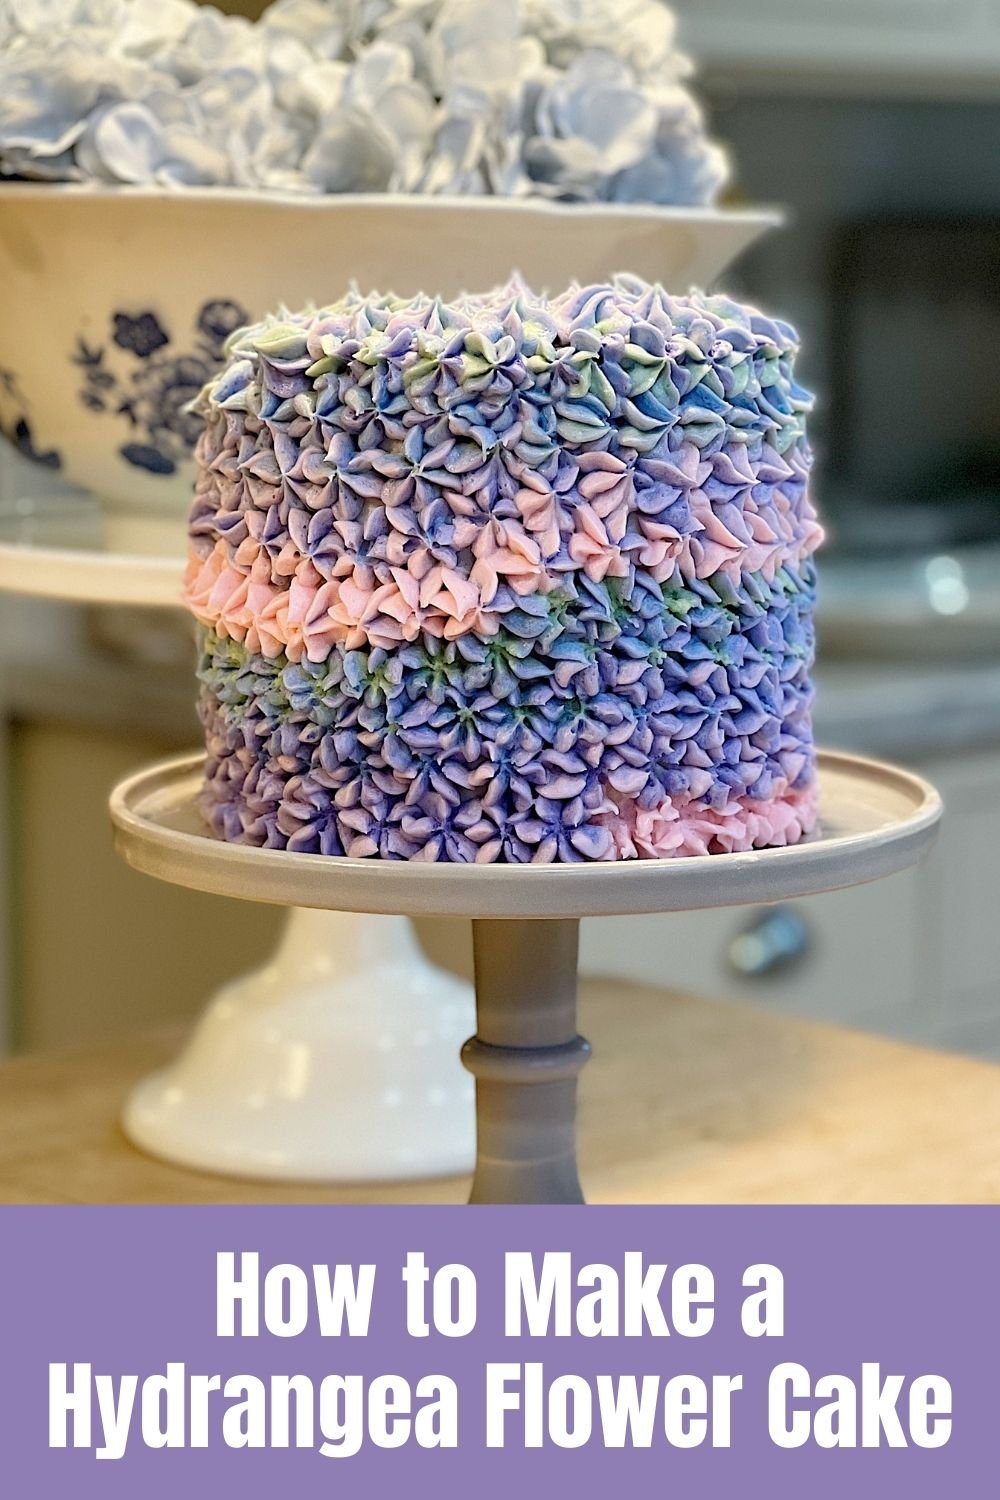 I have very little experience but I love flower cake decorations. So today I tried my luck and made a hydrangea flower cake.